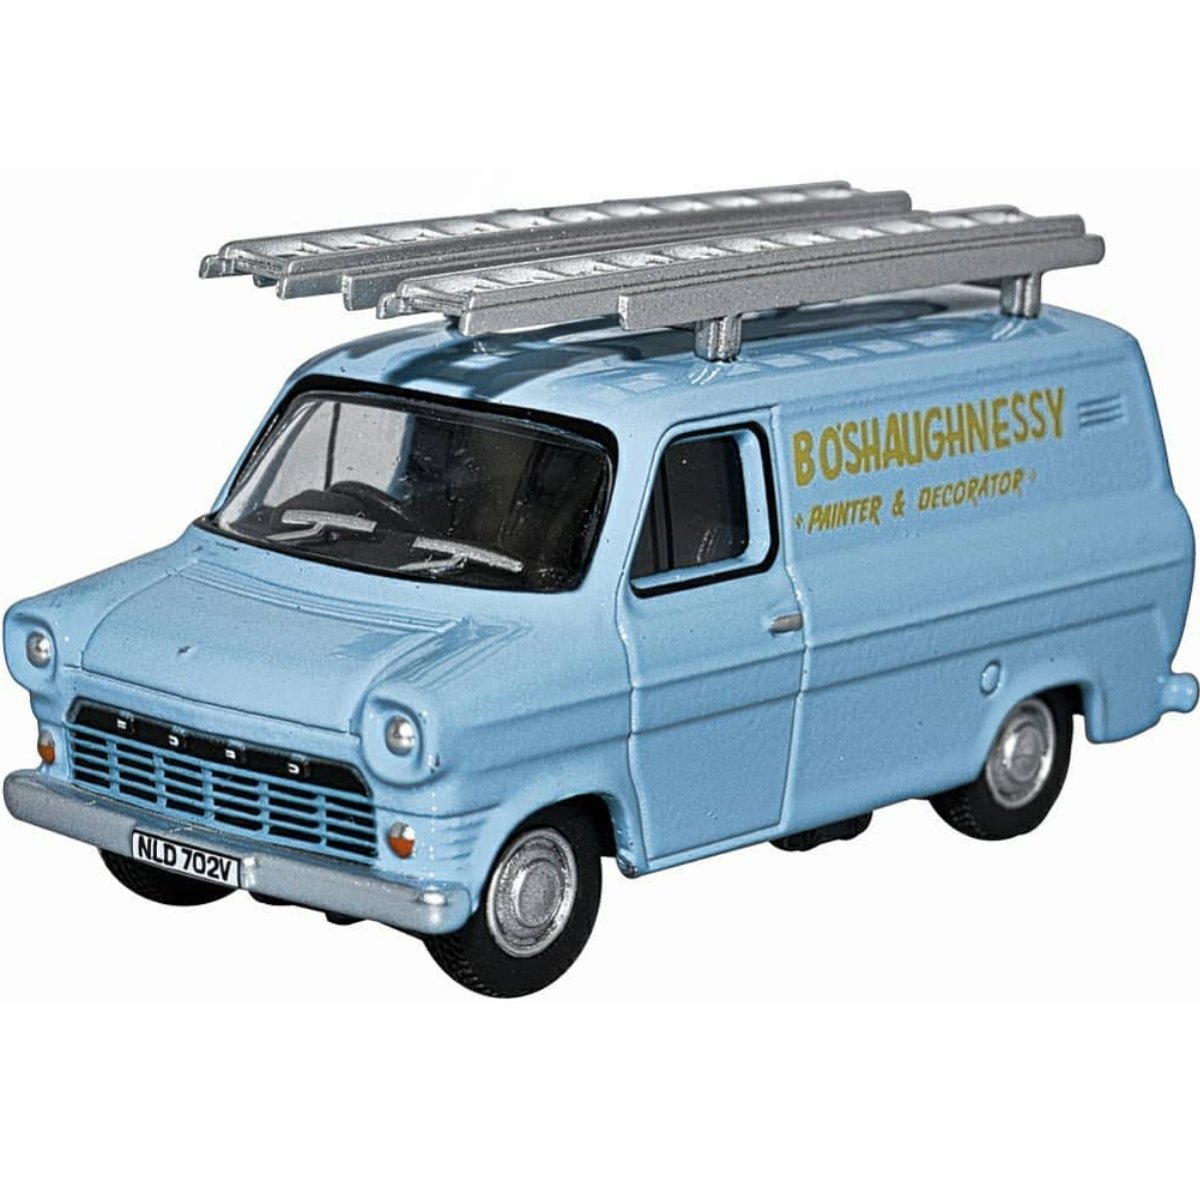 Oxford Diecast Ford Transit MK1 B.O’Shaughnessy - Only Fools and Horses - Phillips Hobbies